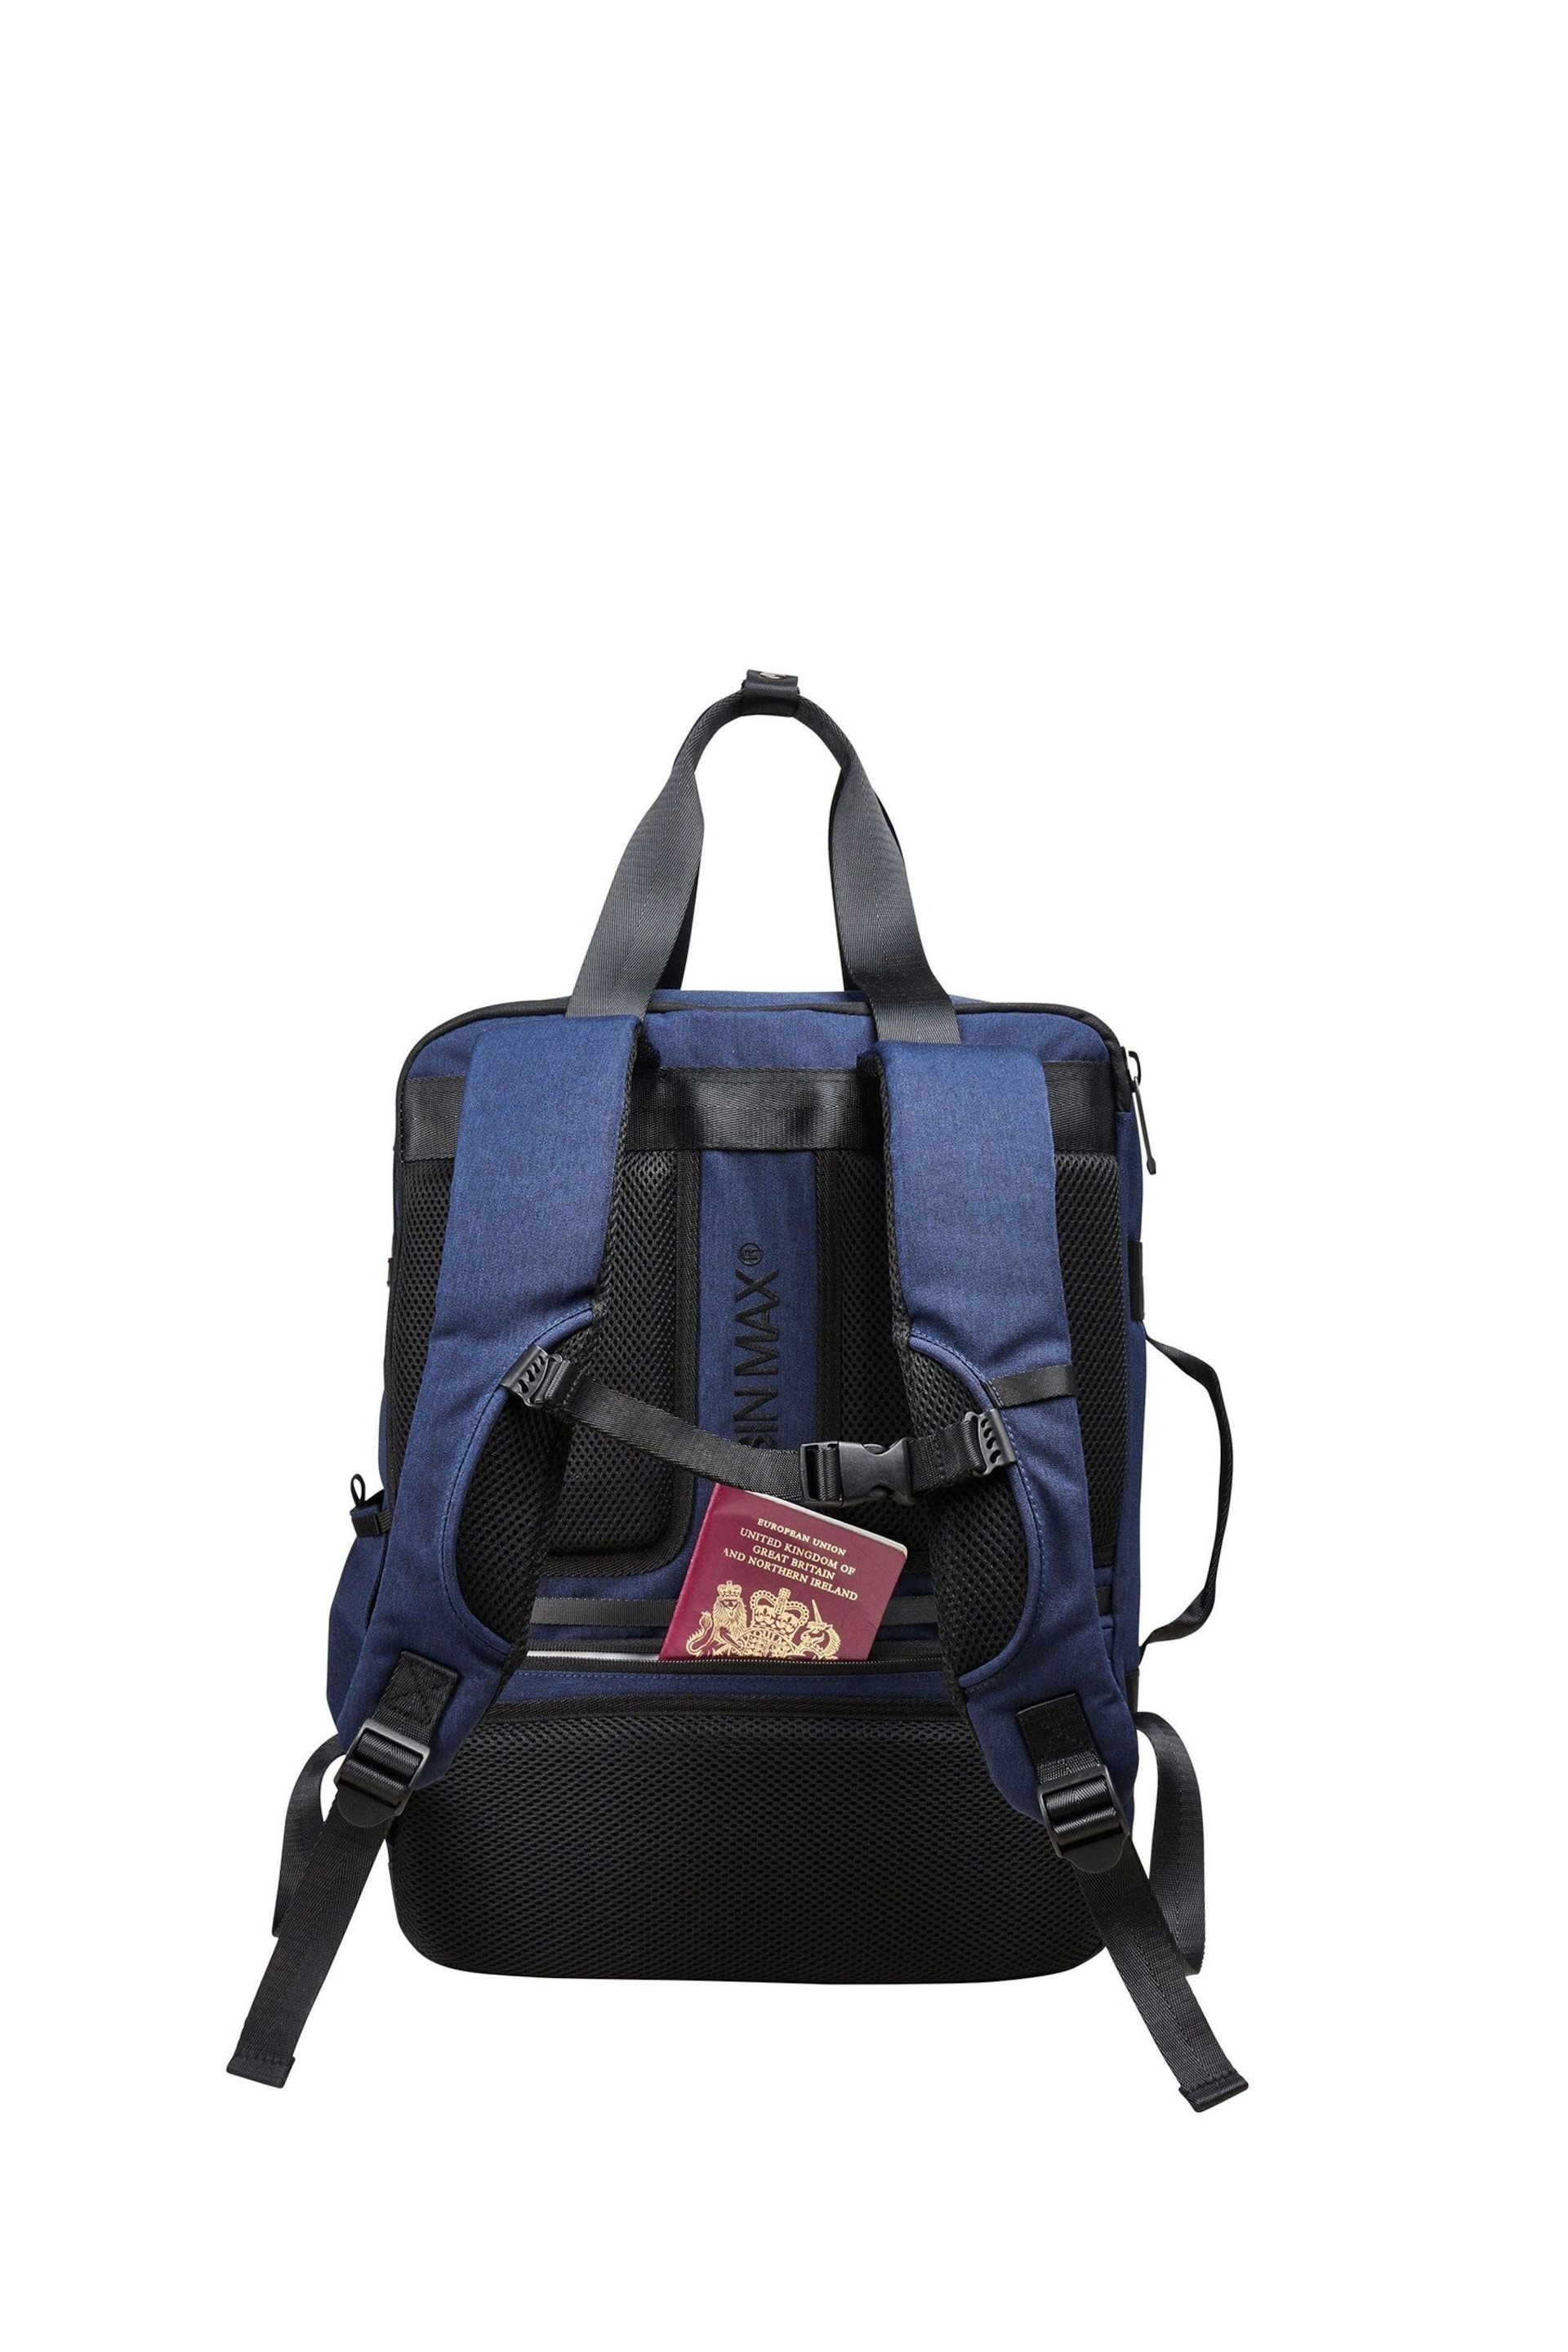 Cabin Max Memphis 24 Litre 40cm Travel Backpack - Image 5 of 7